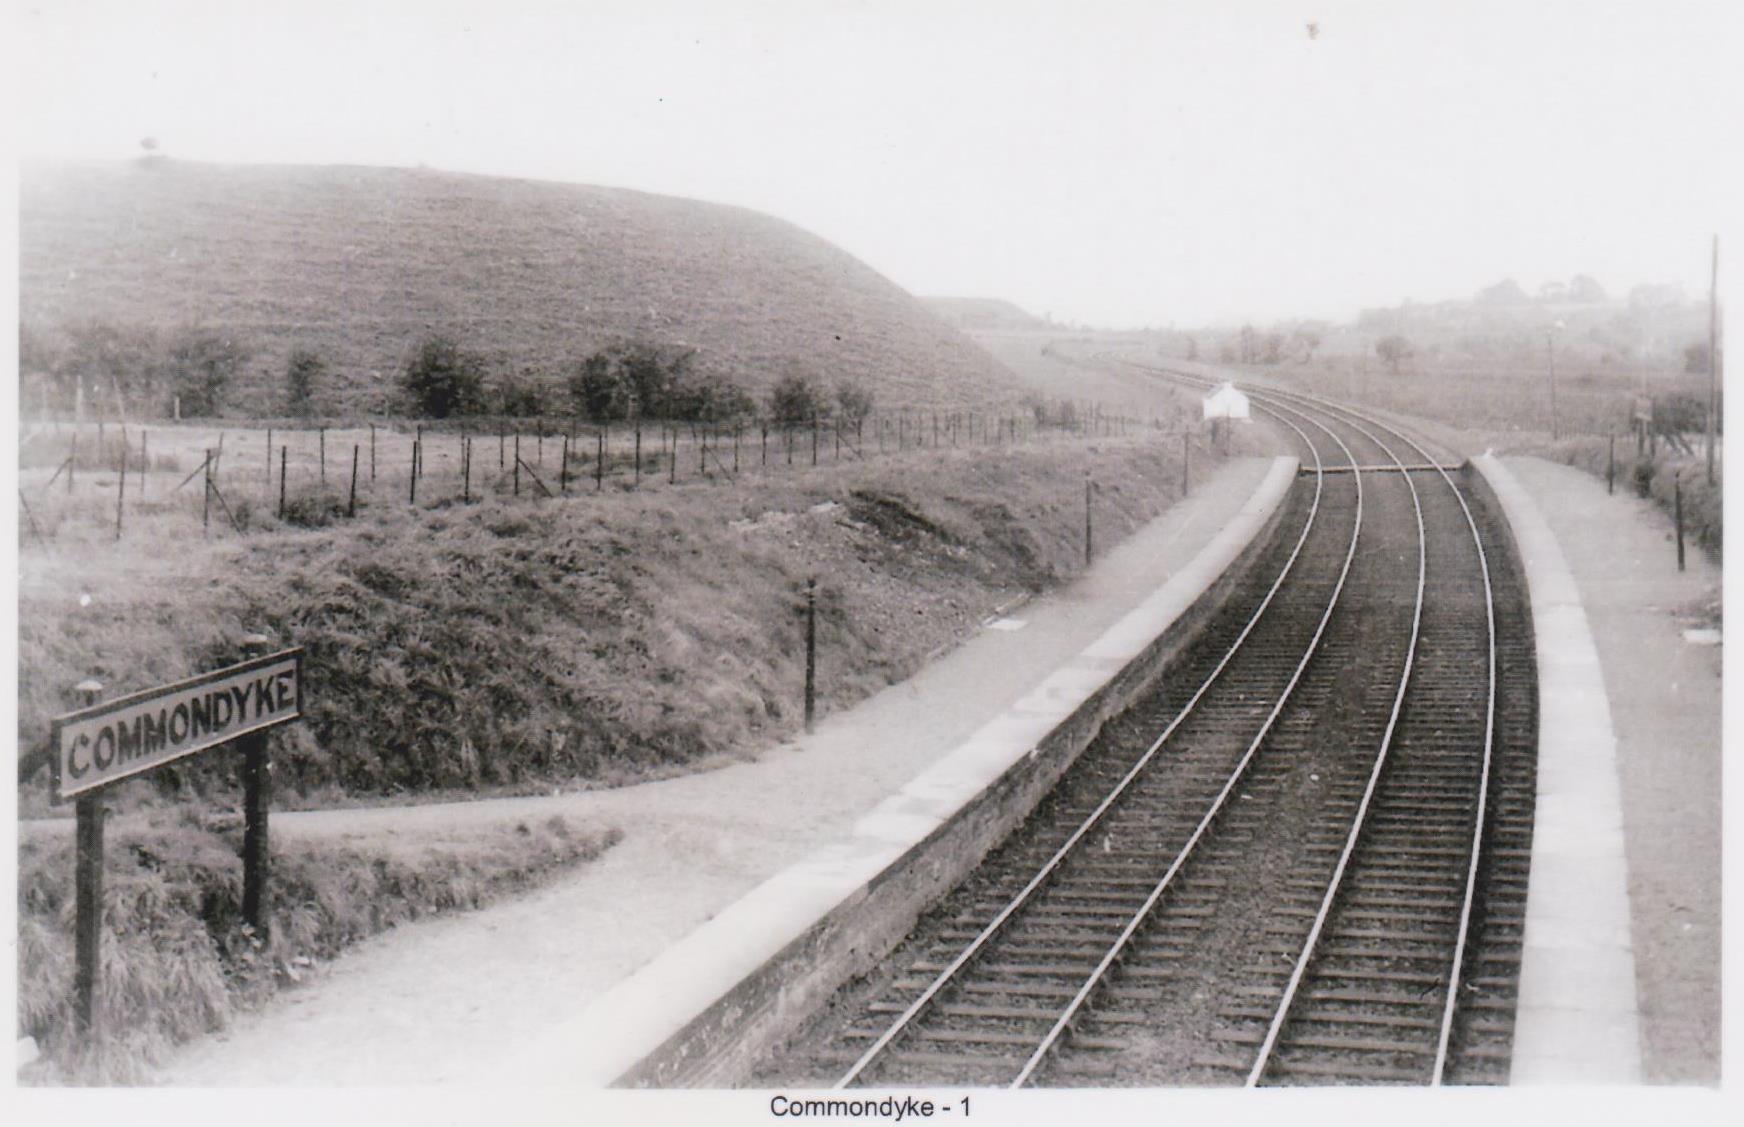 Railway in the countryside stretching into the distance. On the left in the foreground is a sign saying 'Commondyke'